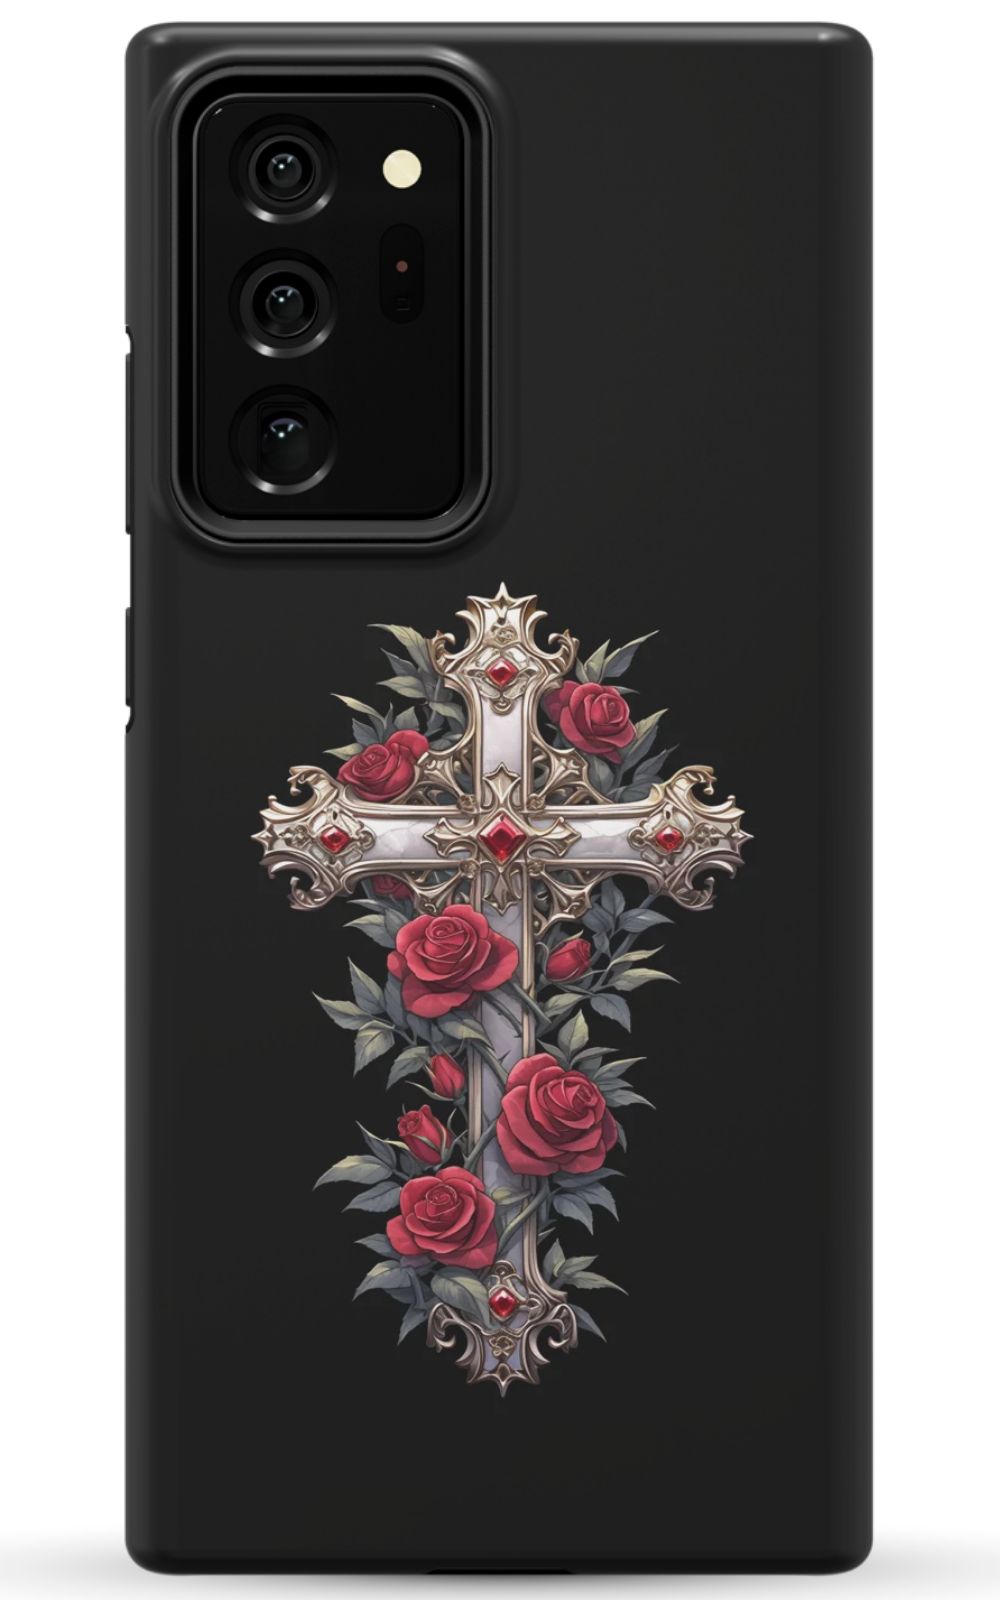 Phone Case "Everlasting Devotion": A Symbol of Enduring Faith and Passionate Love